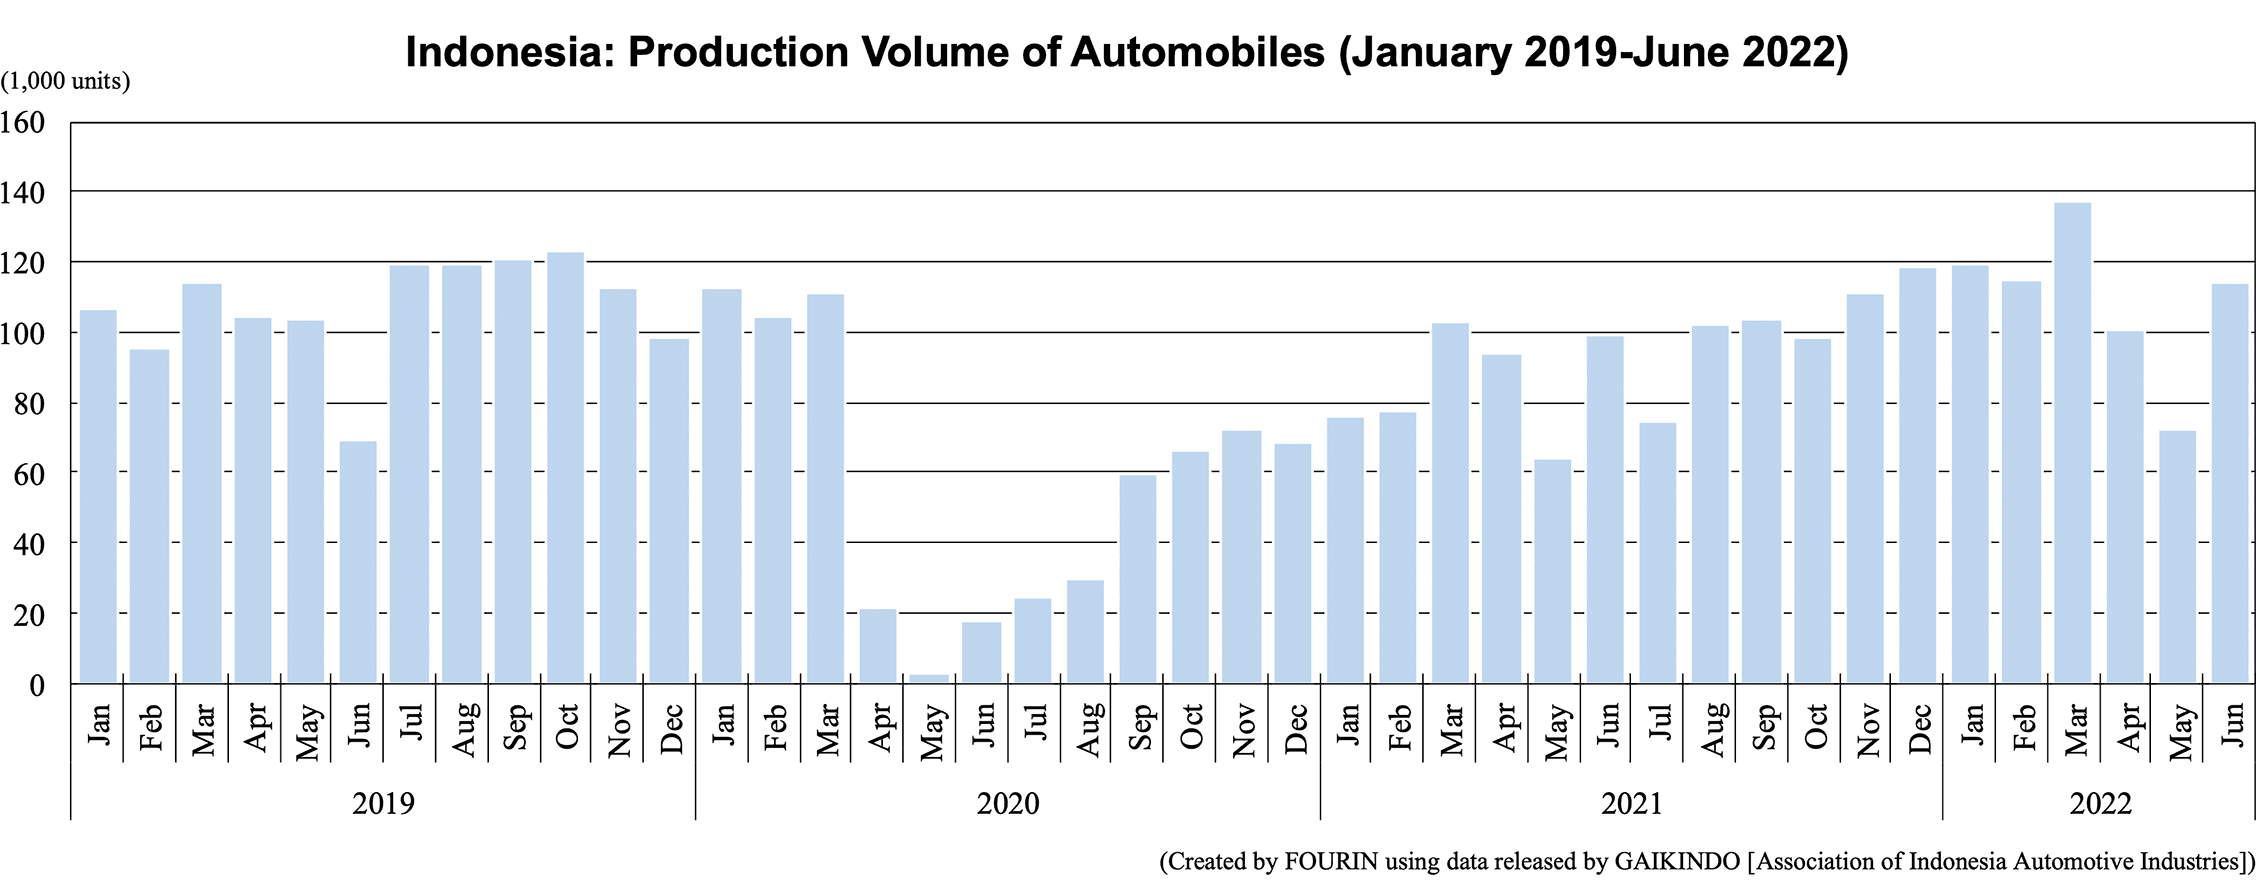 Indonesia: Production Volume of Automobiles (January 2019-June 2022)